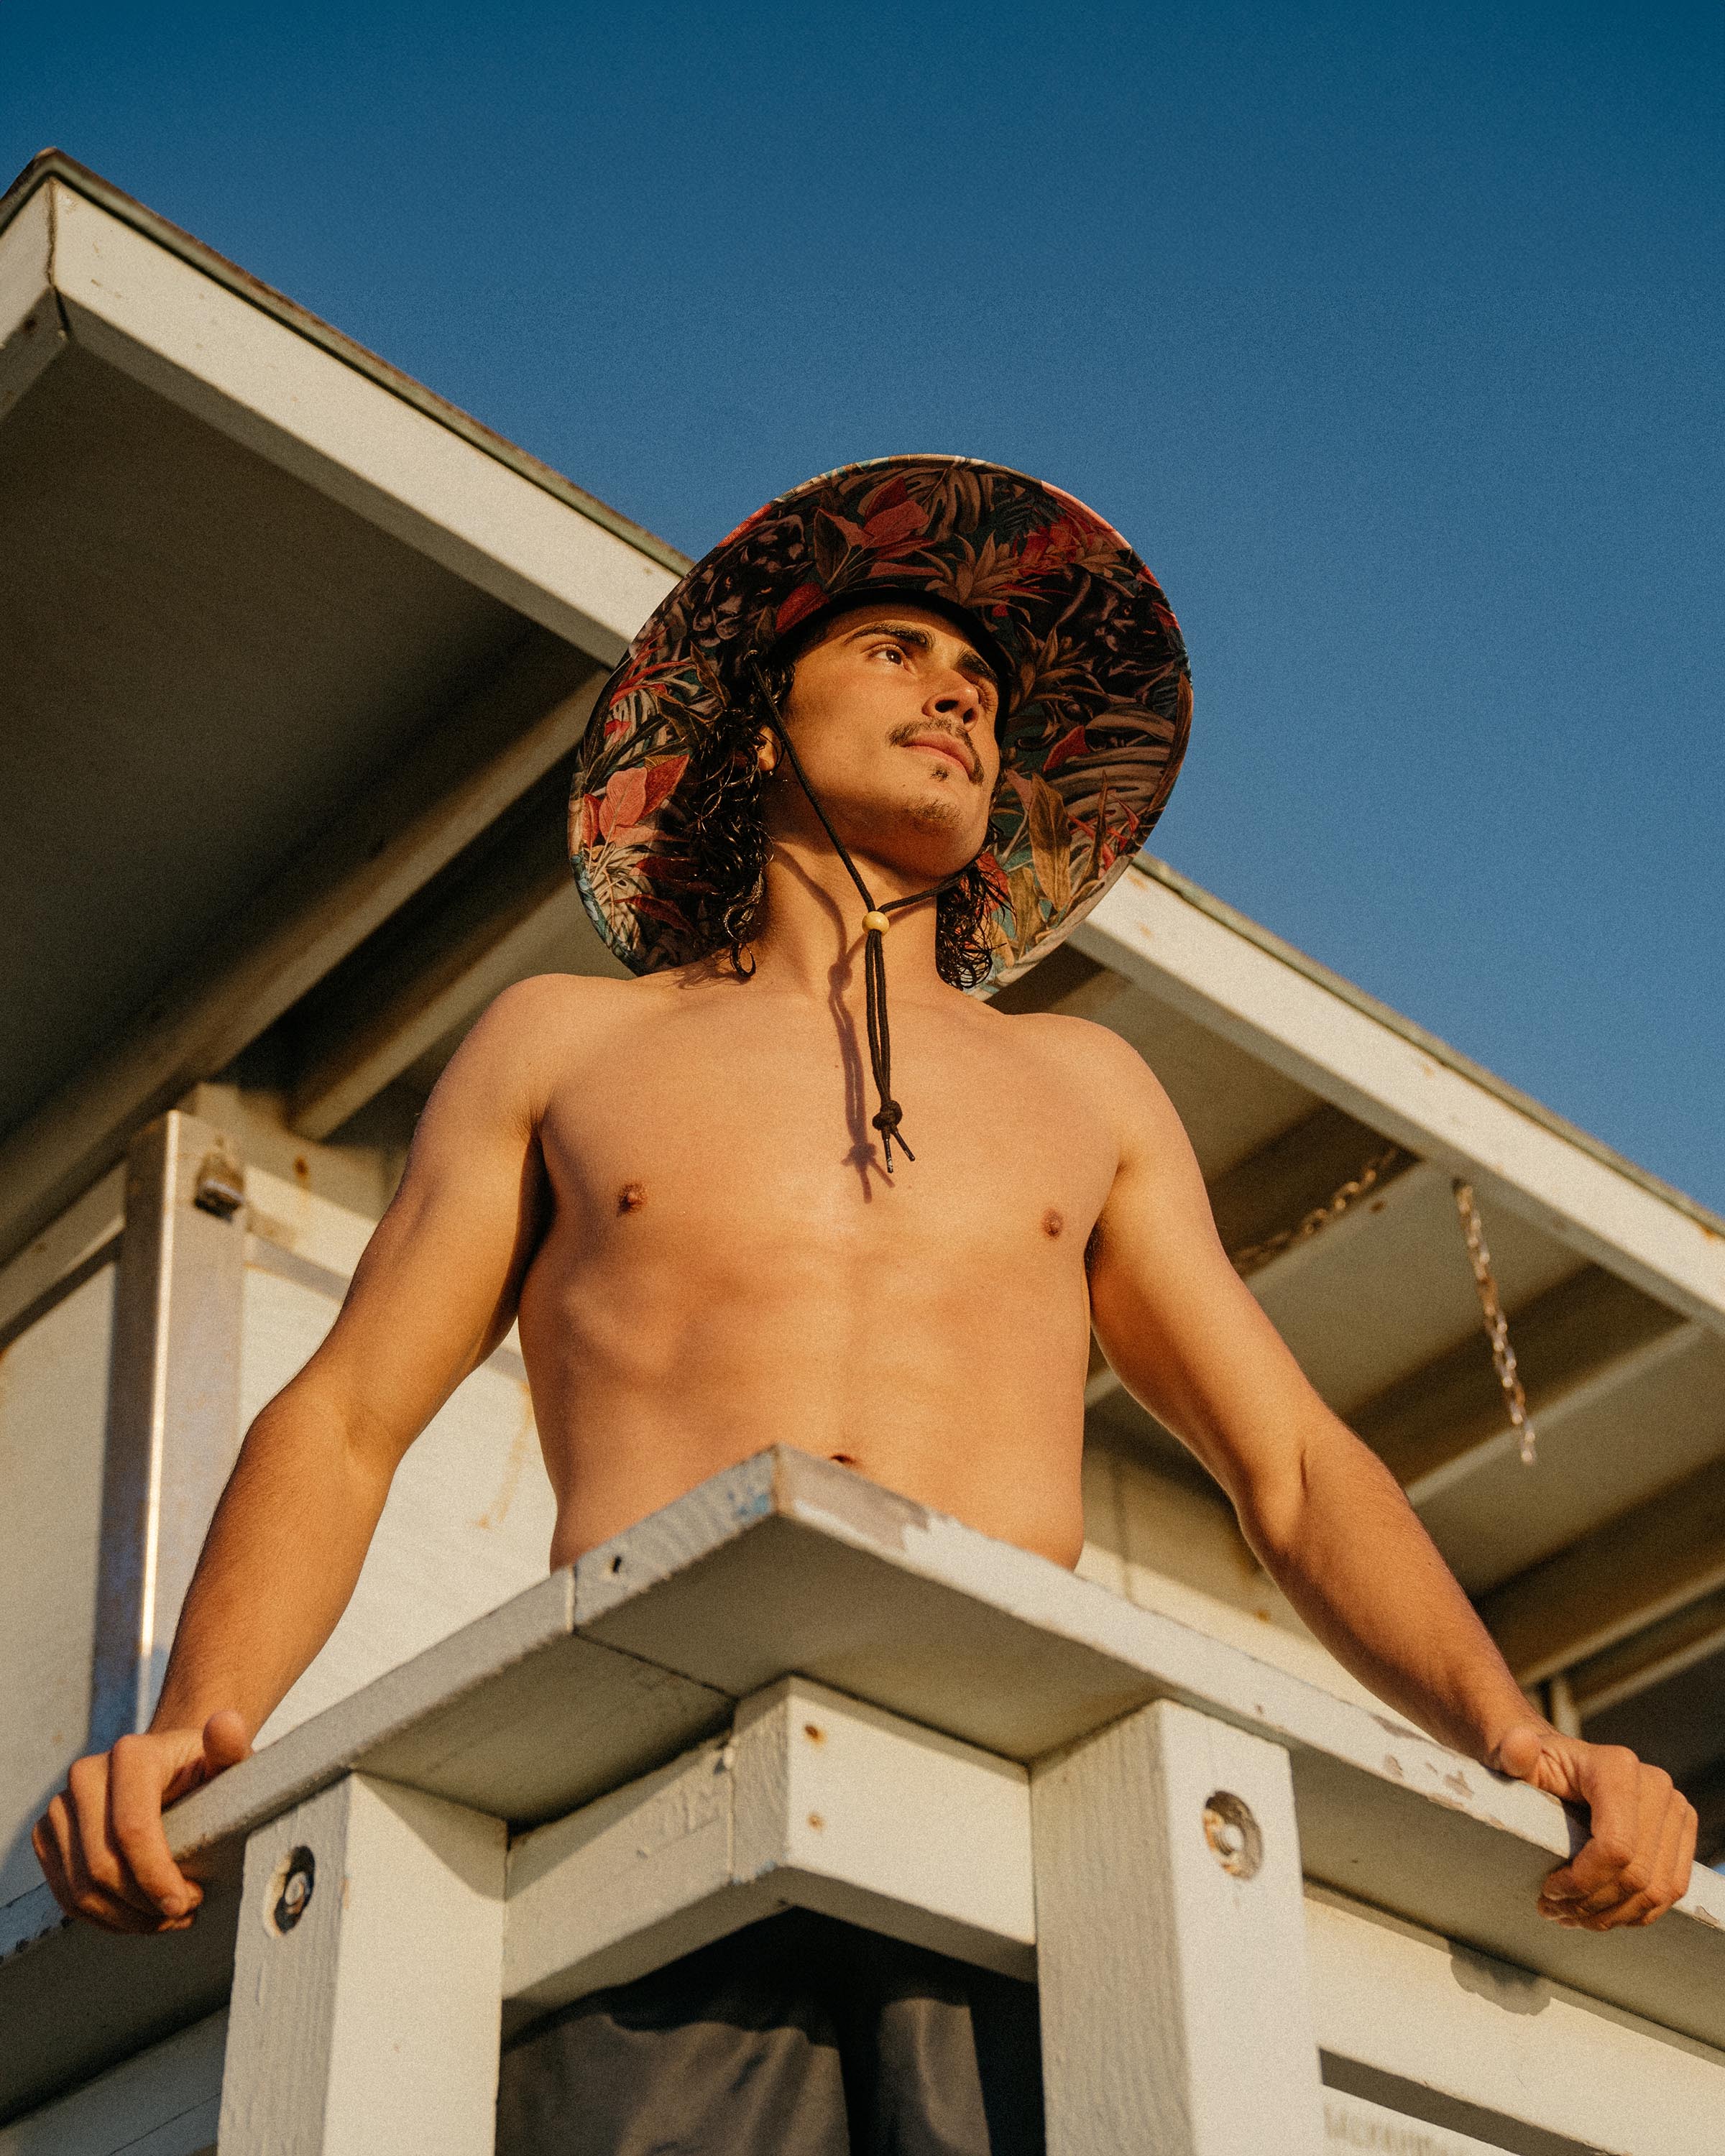 Hemlock male model looking up wearing Bombay straw lifeguard hat with Panther pattern